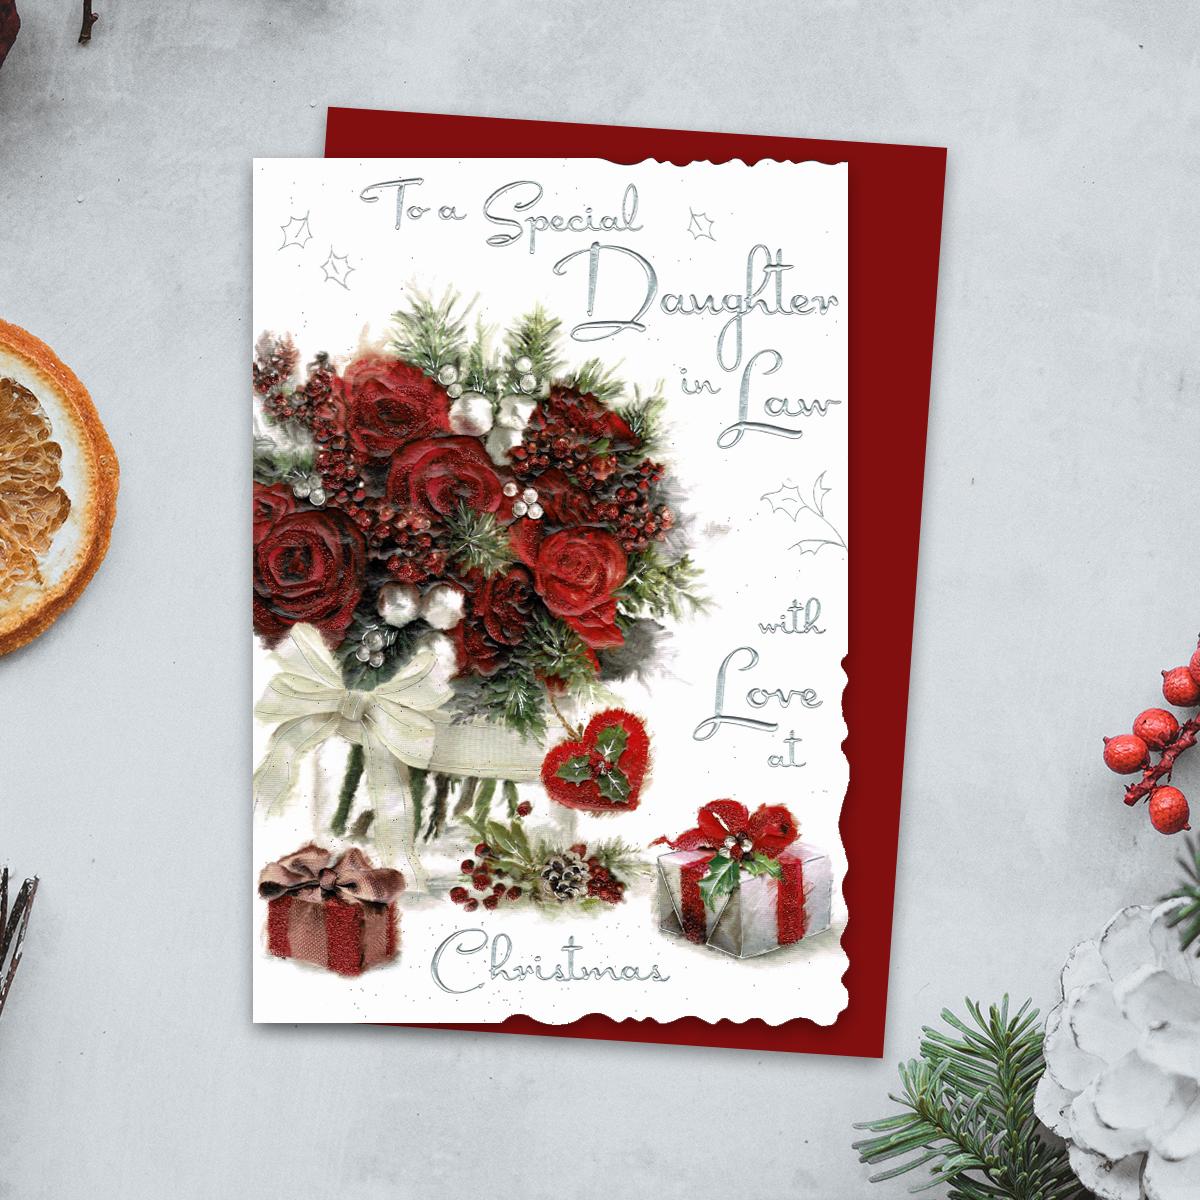 To A Special Daughter In Law With Love At Christmas Features Red Roses, Gifts And A Red Heart. Finished With Silver Foiled Lettering, Red Glitter Detail And Red Envelope